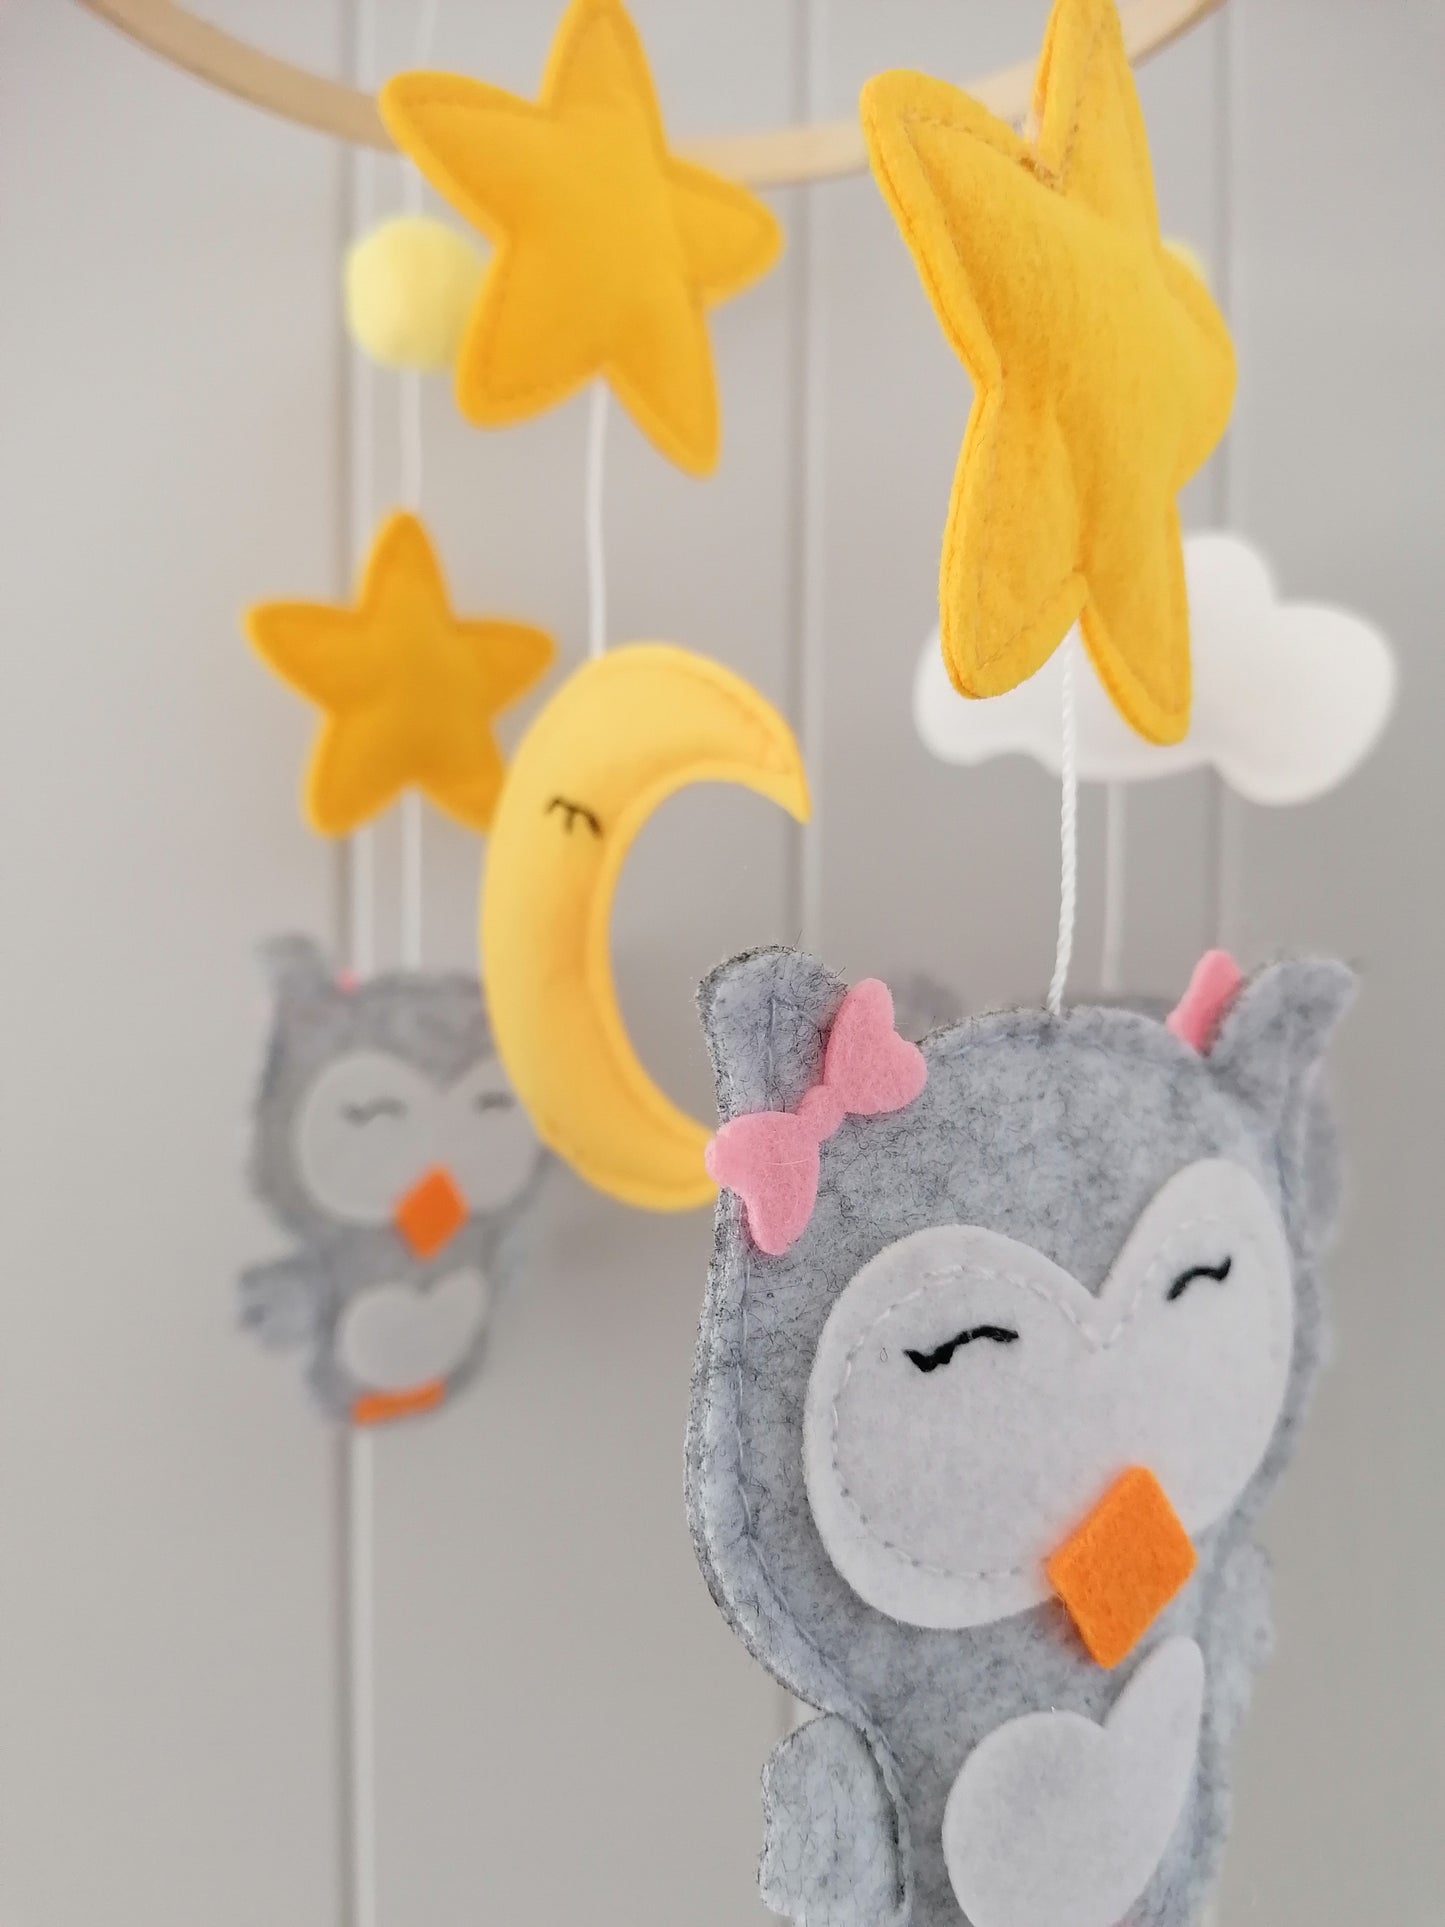 Mr and Mrs Owl Cot Mobile